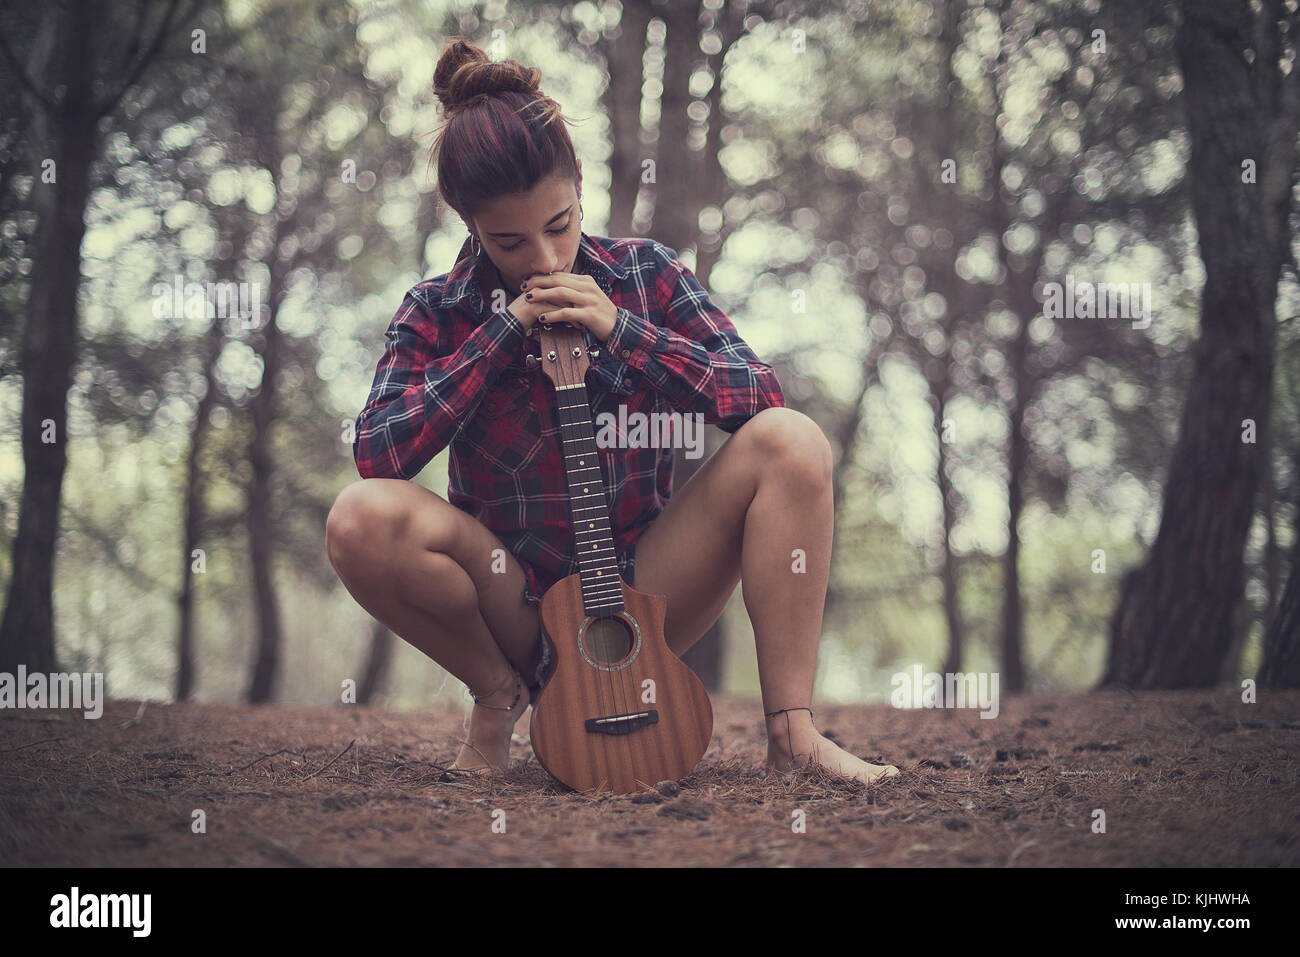 Teenage girl crouching in the forest with her ukulele Stock Photo